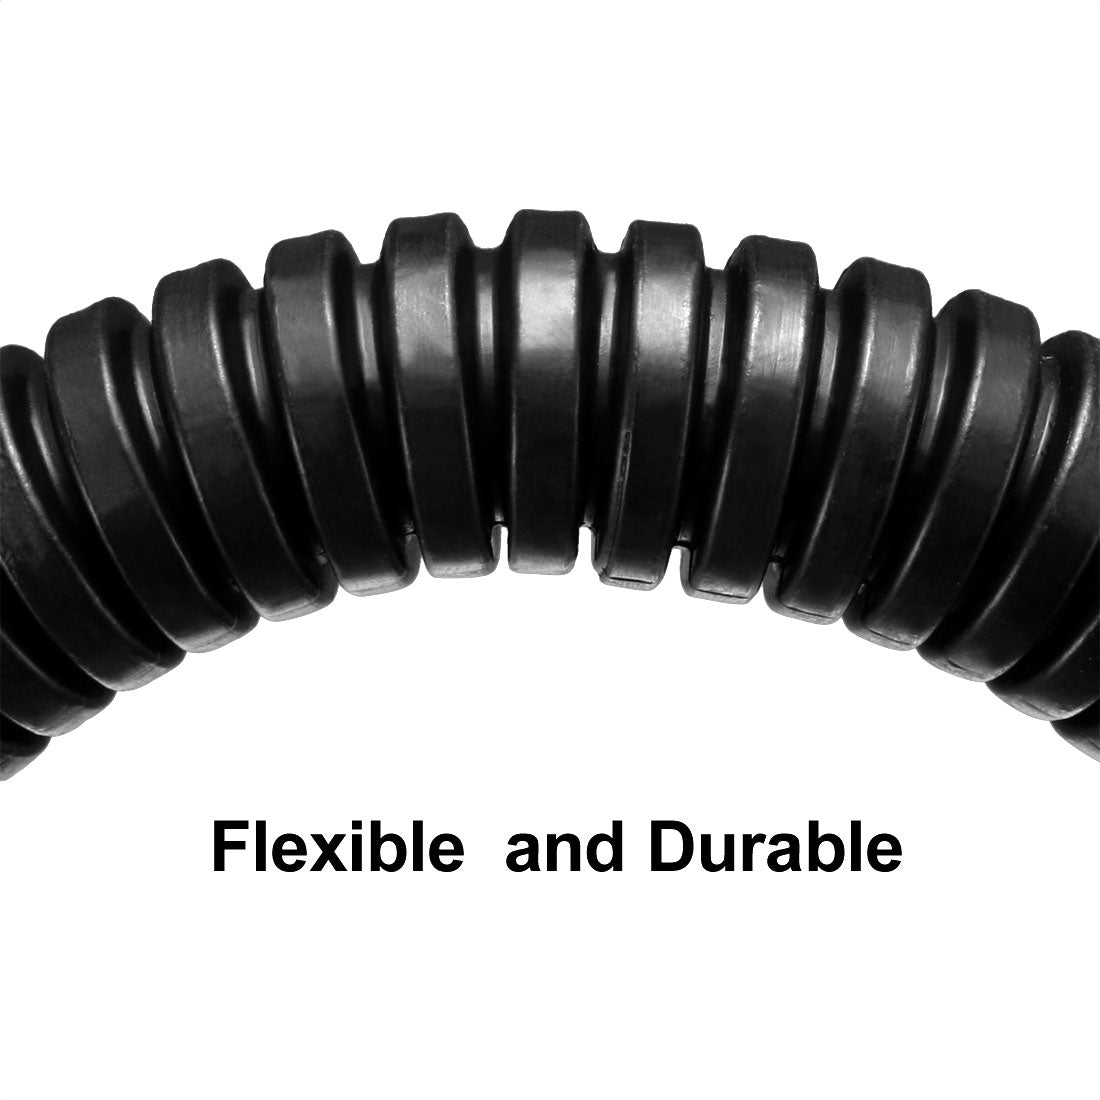 uxcell Uxcell 3 M 6.5 x 10 mm PP Flexible Corrugated Conduit Tube for Garden,Office Black